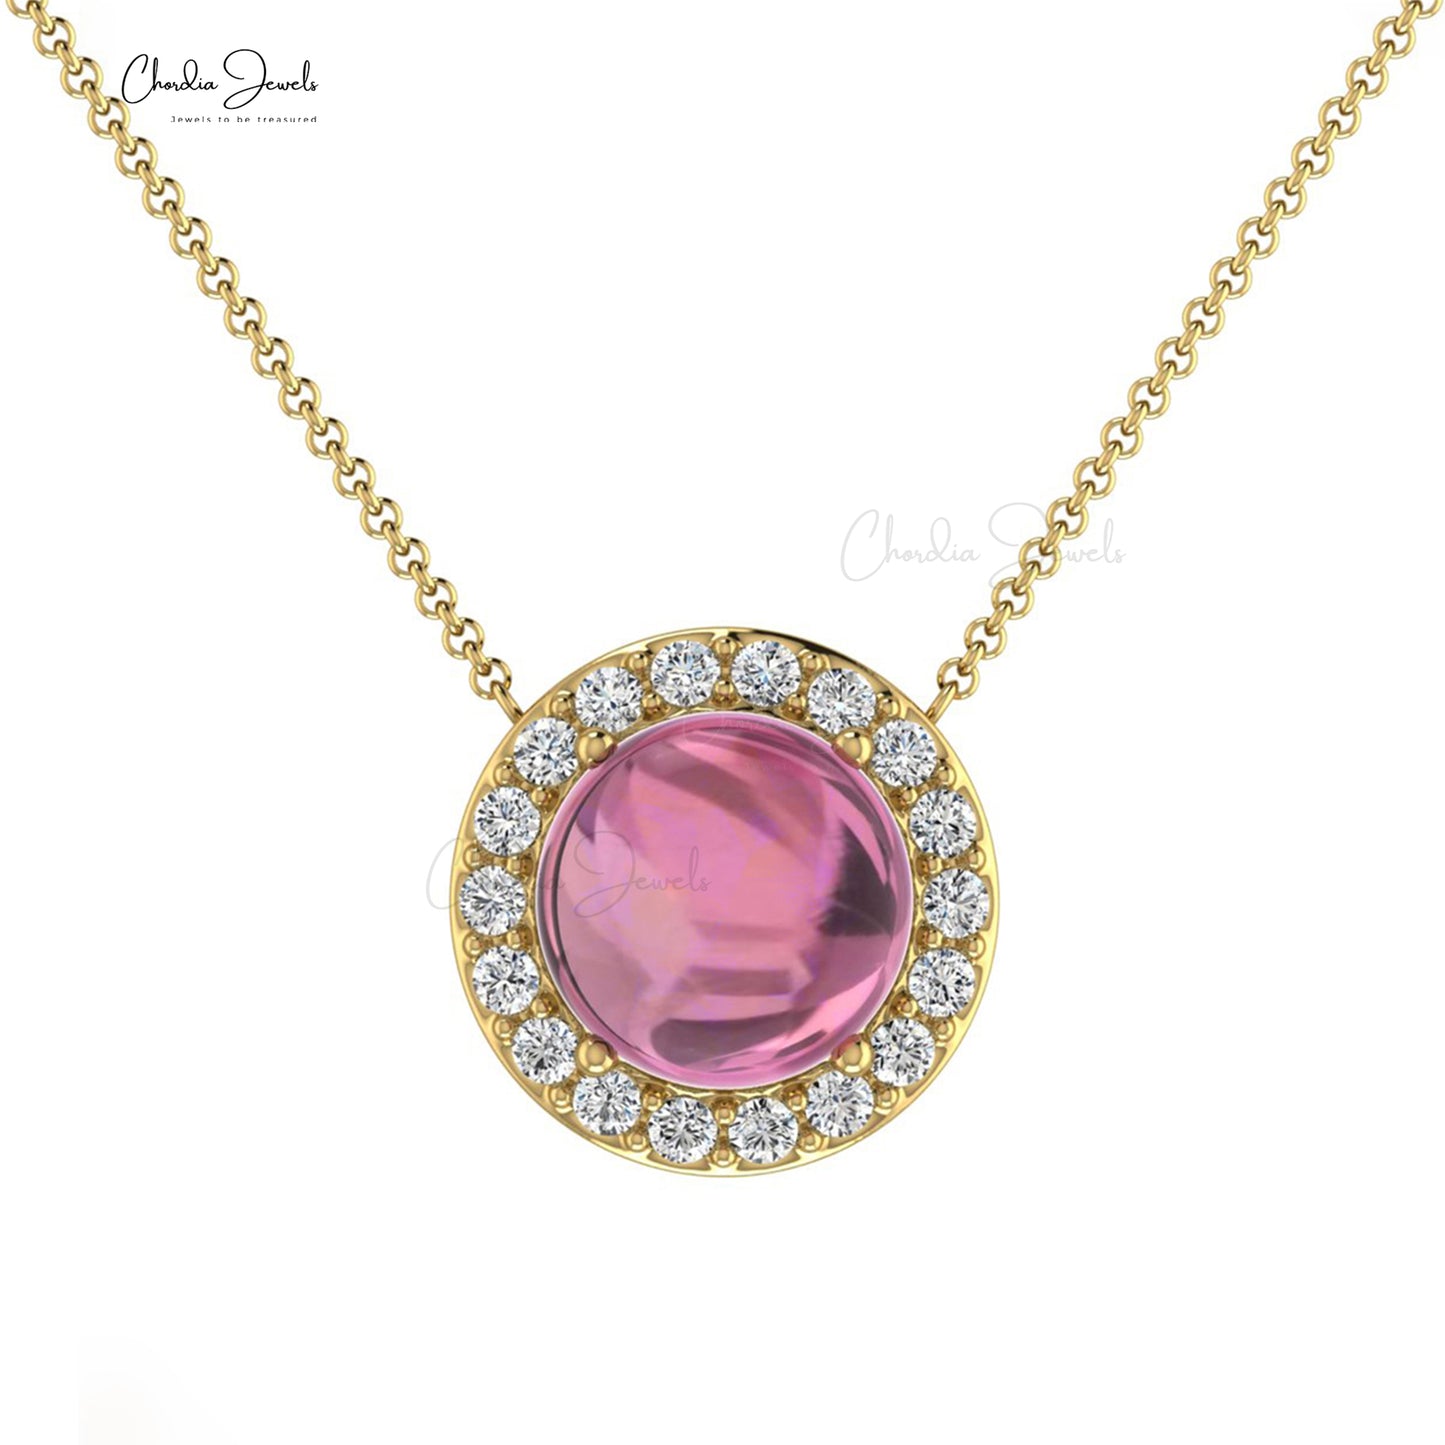 Load image into Gallery viewer, Natural Pink Tourmaline Cabochon Necklace, 14k Solid Gold Gemstone Necklace, 6mm Round Cut October Birthstone Dainty Necklace Gift for Her
